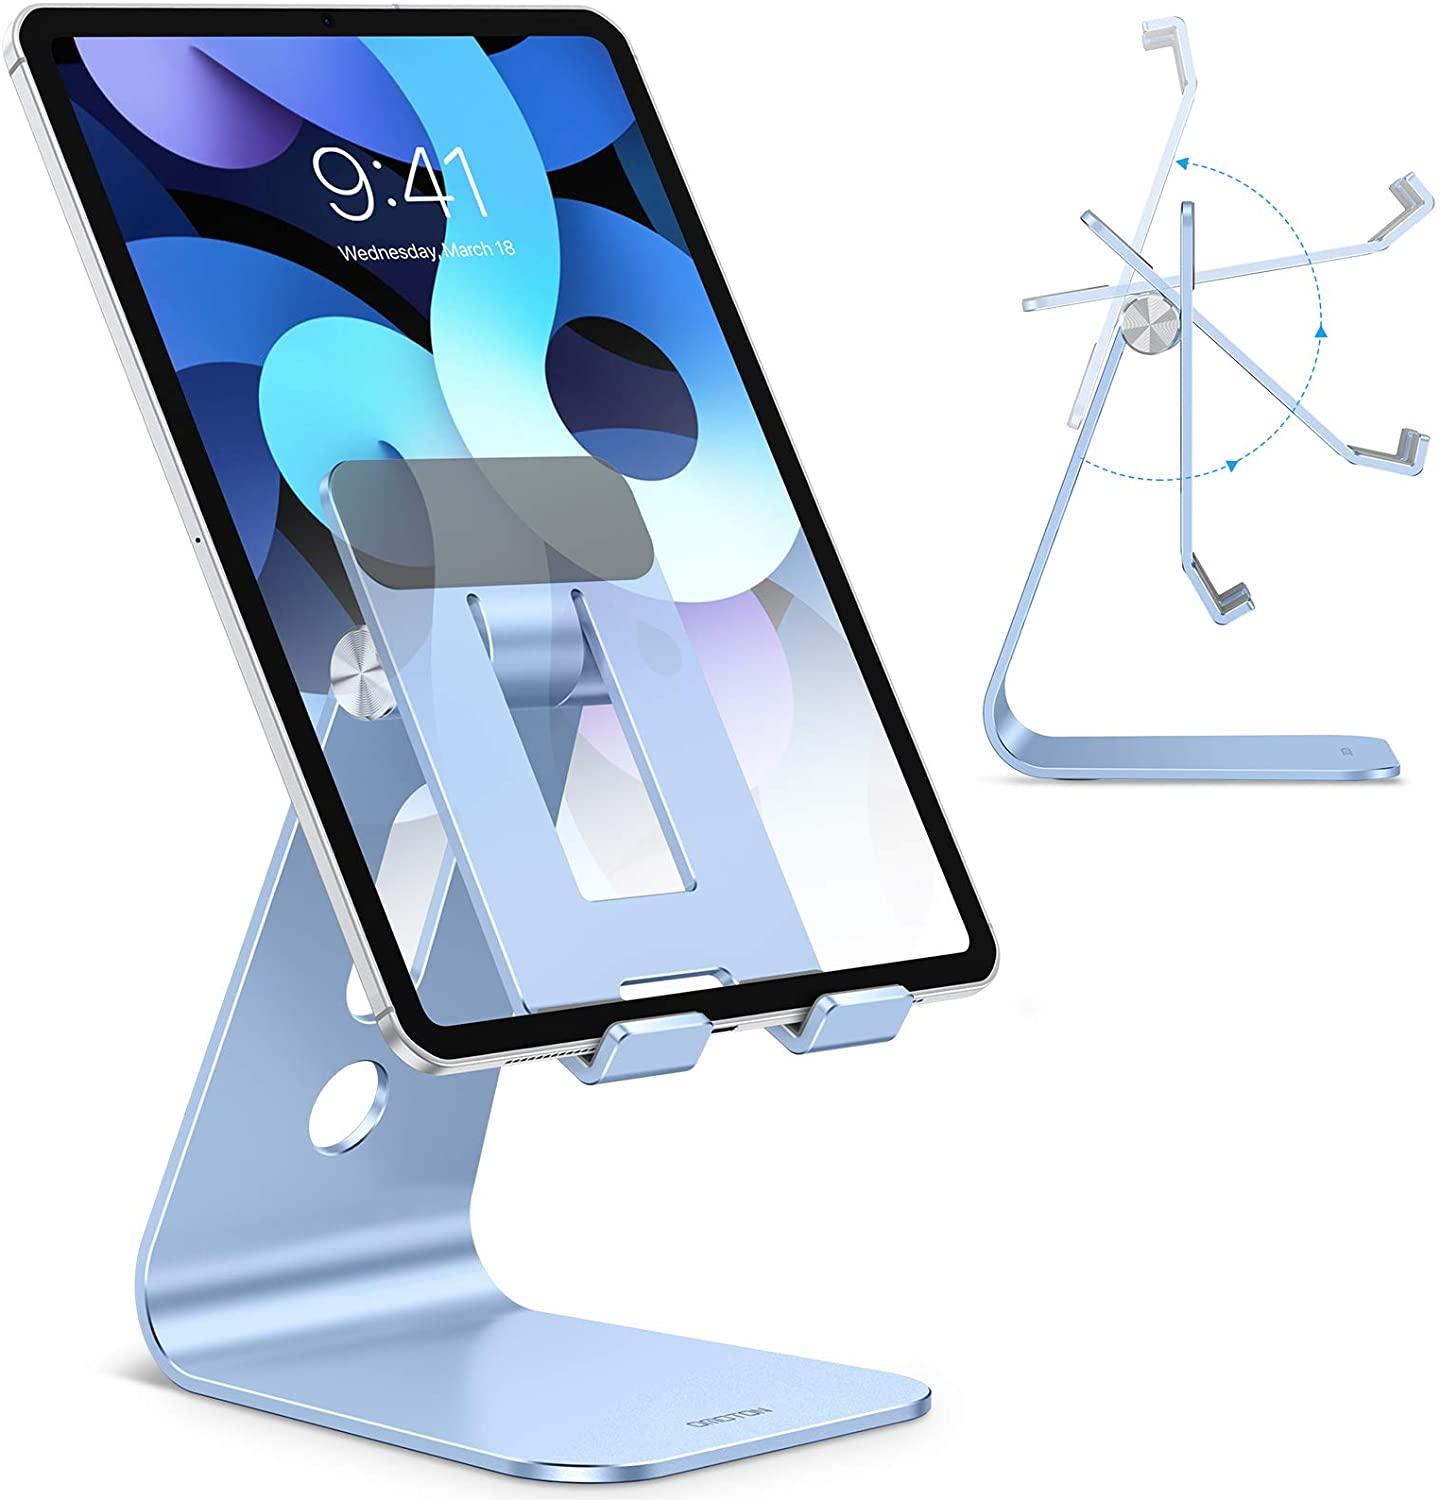 Adjustable Tablet Stand for Desk, Upgraded Longer Arms for Greater Stability - Lasercutwraps Shop